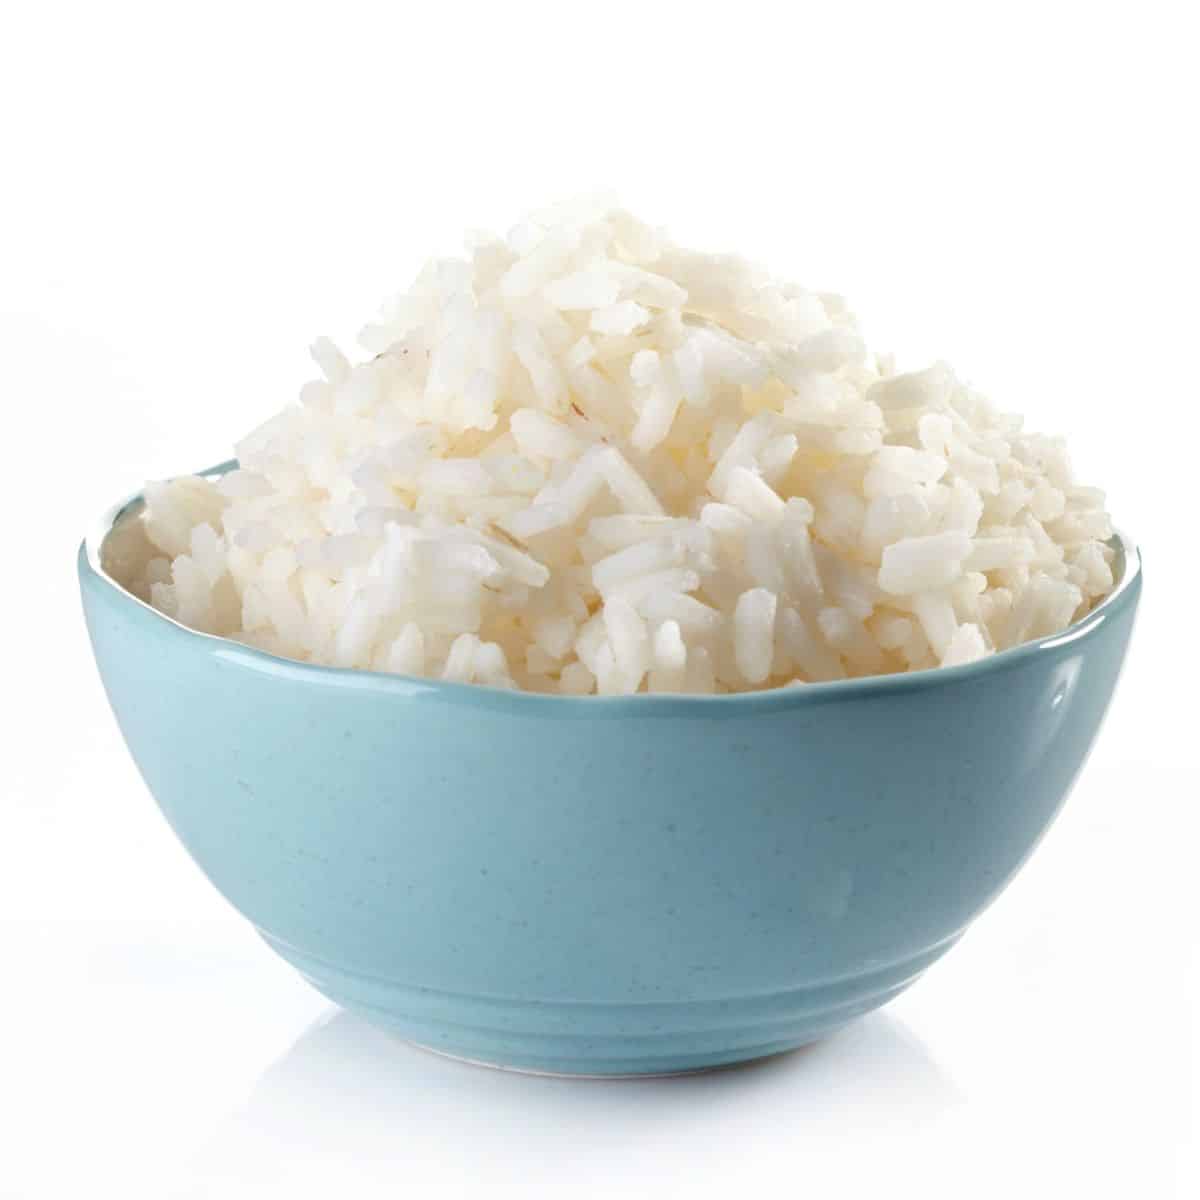 Bhutanese white rice in a blue bowl on an isolated white background.